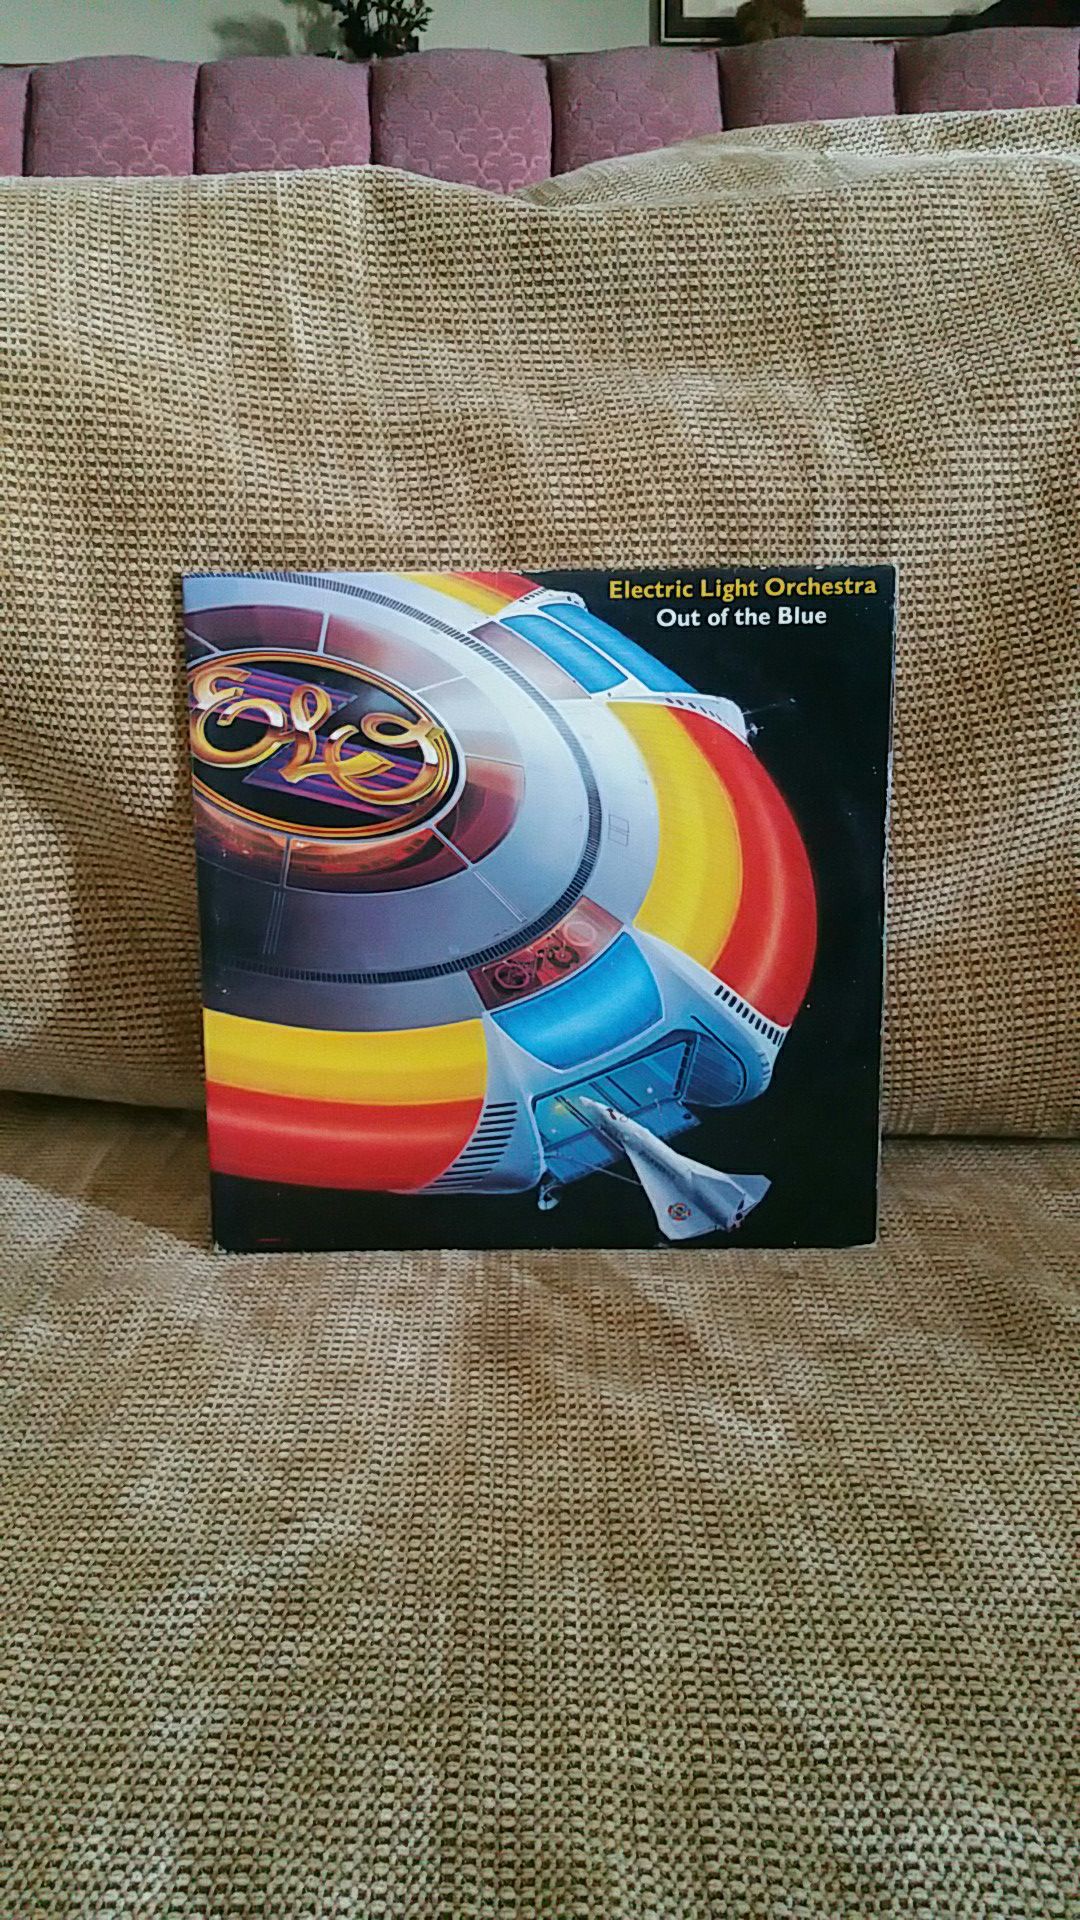 Electric Light Orchestra "Out Of The Blue."